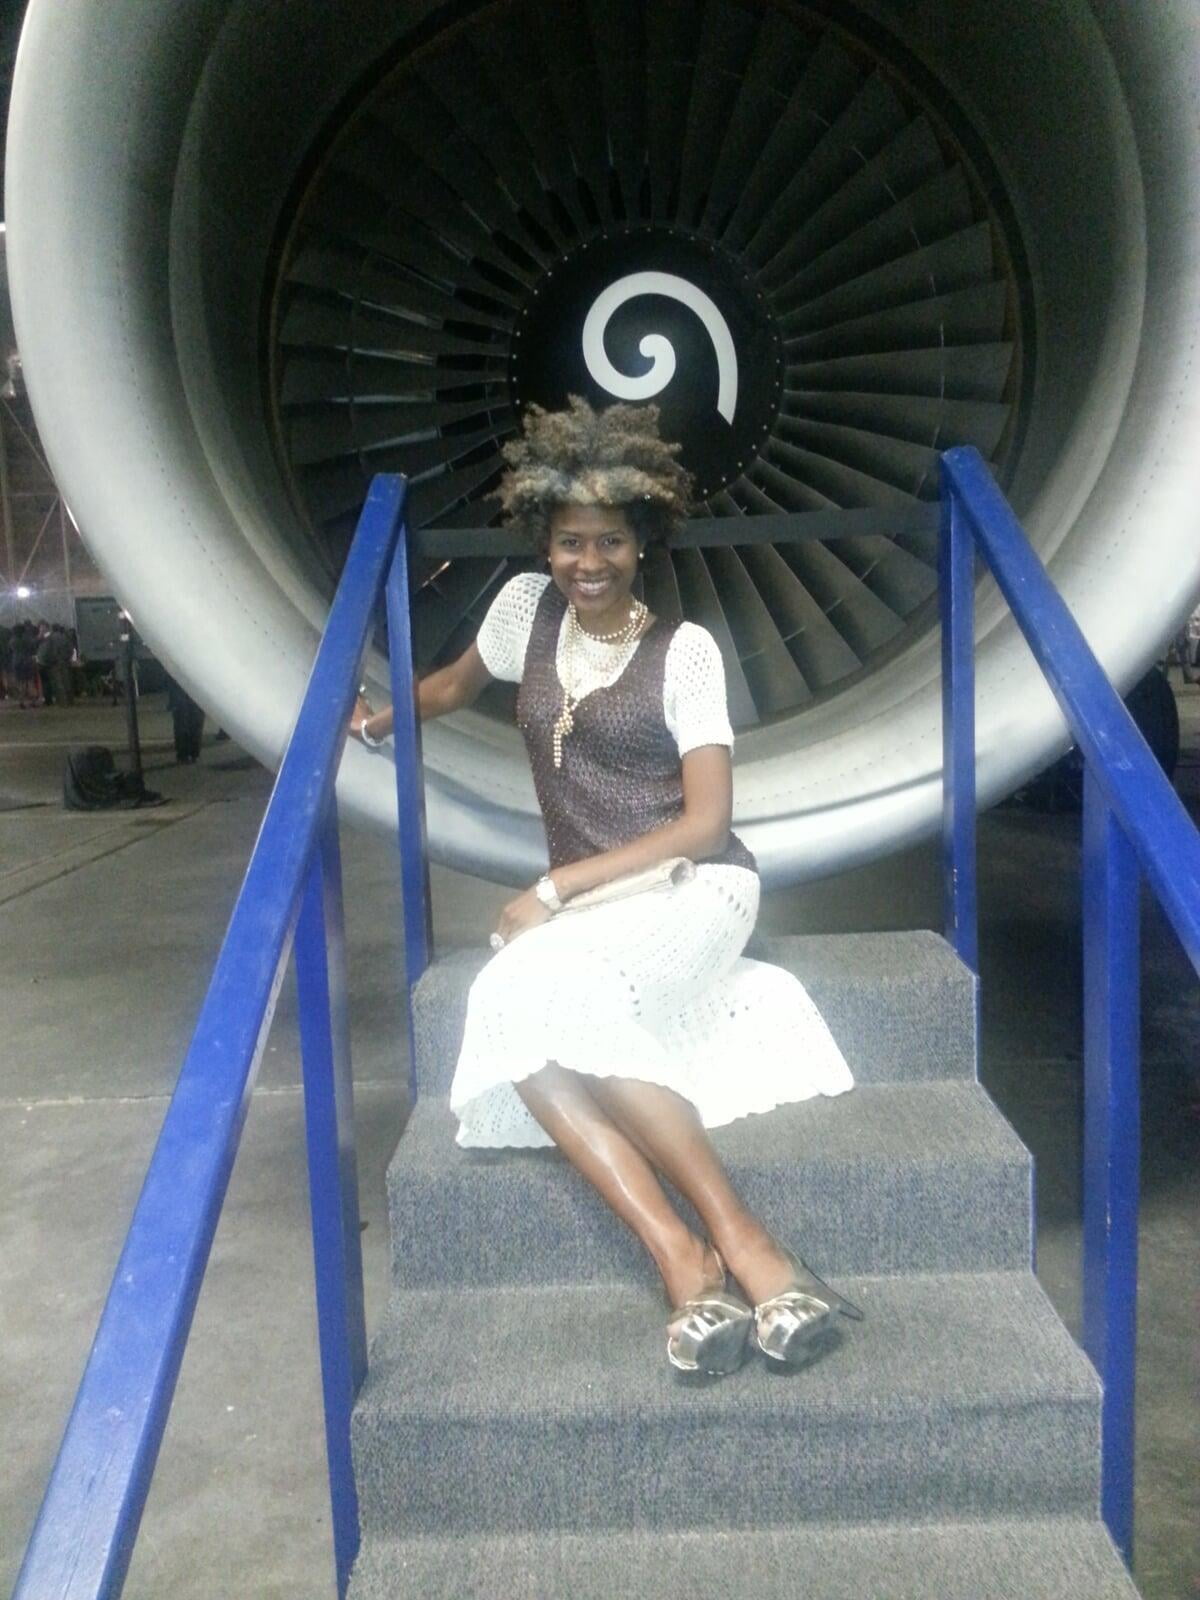 Andrea sitting in front of plane engine.